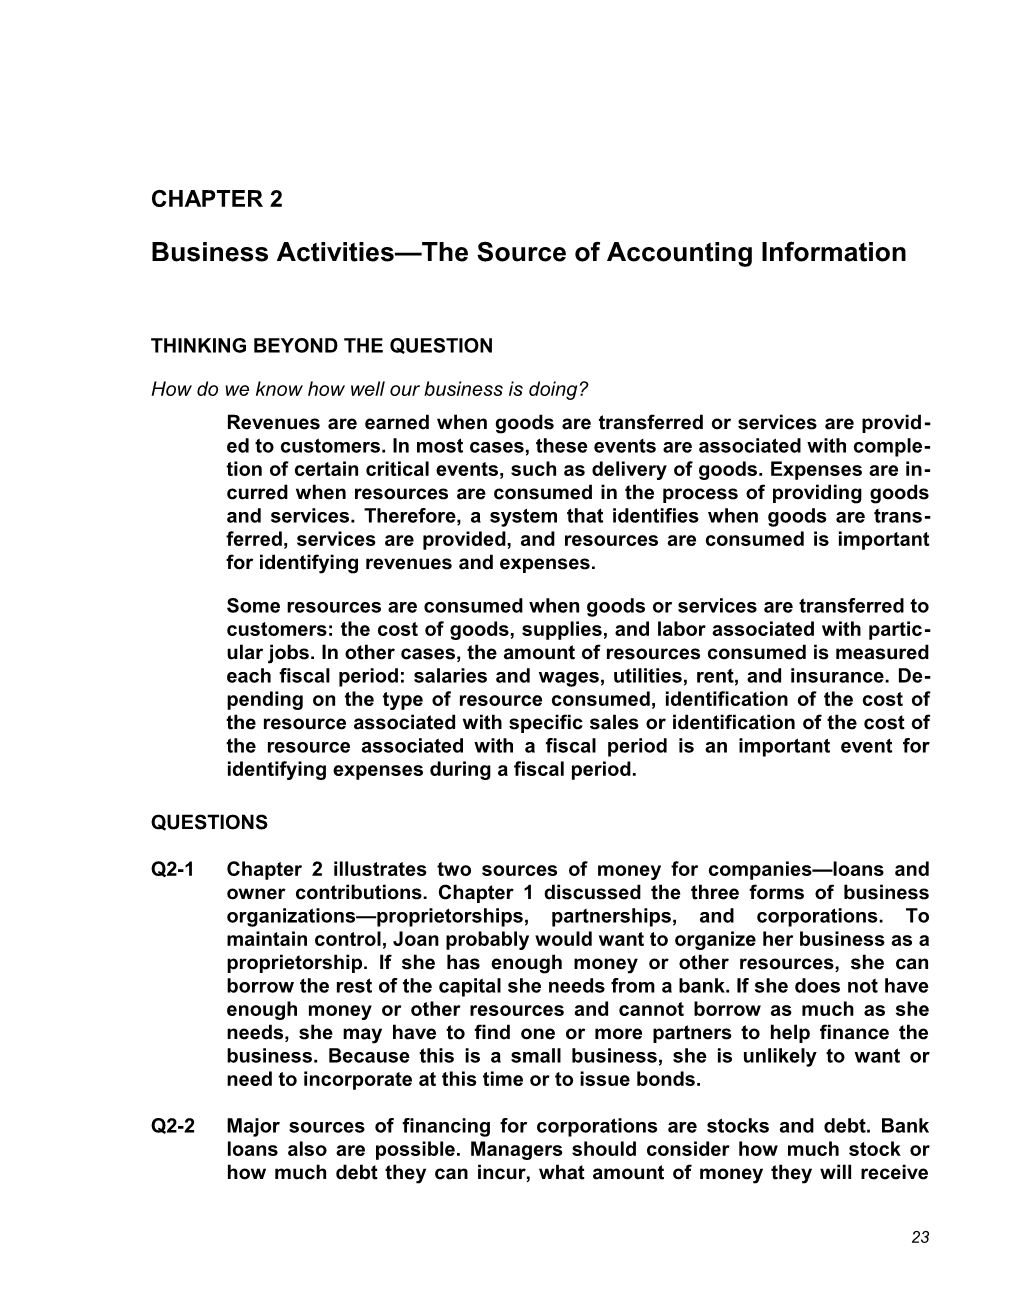 Business Activities the Source of Accounting Information